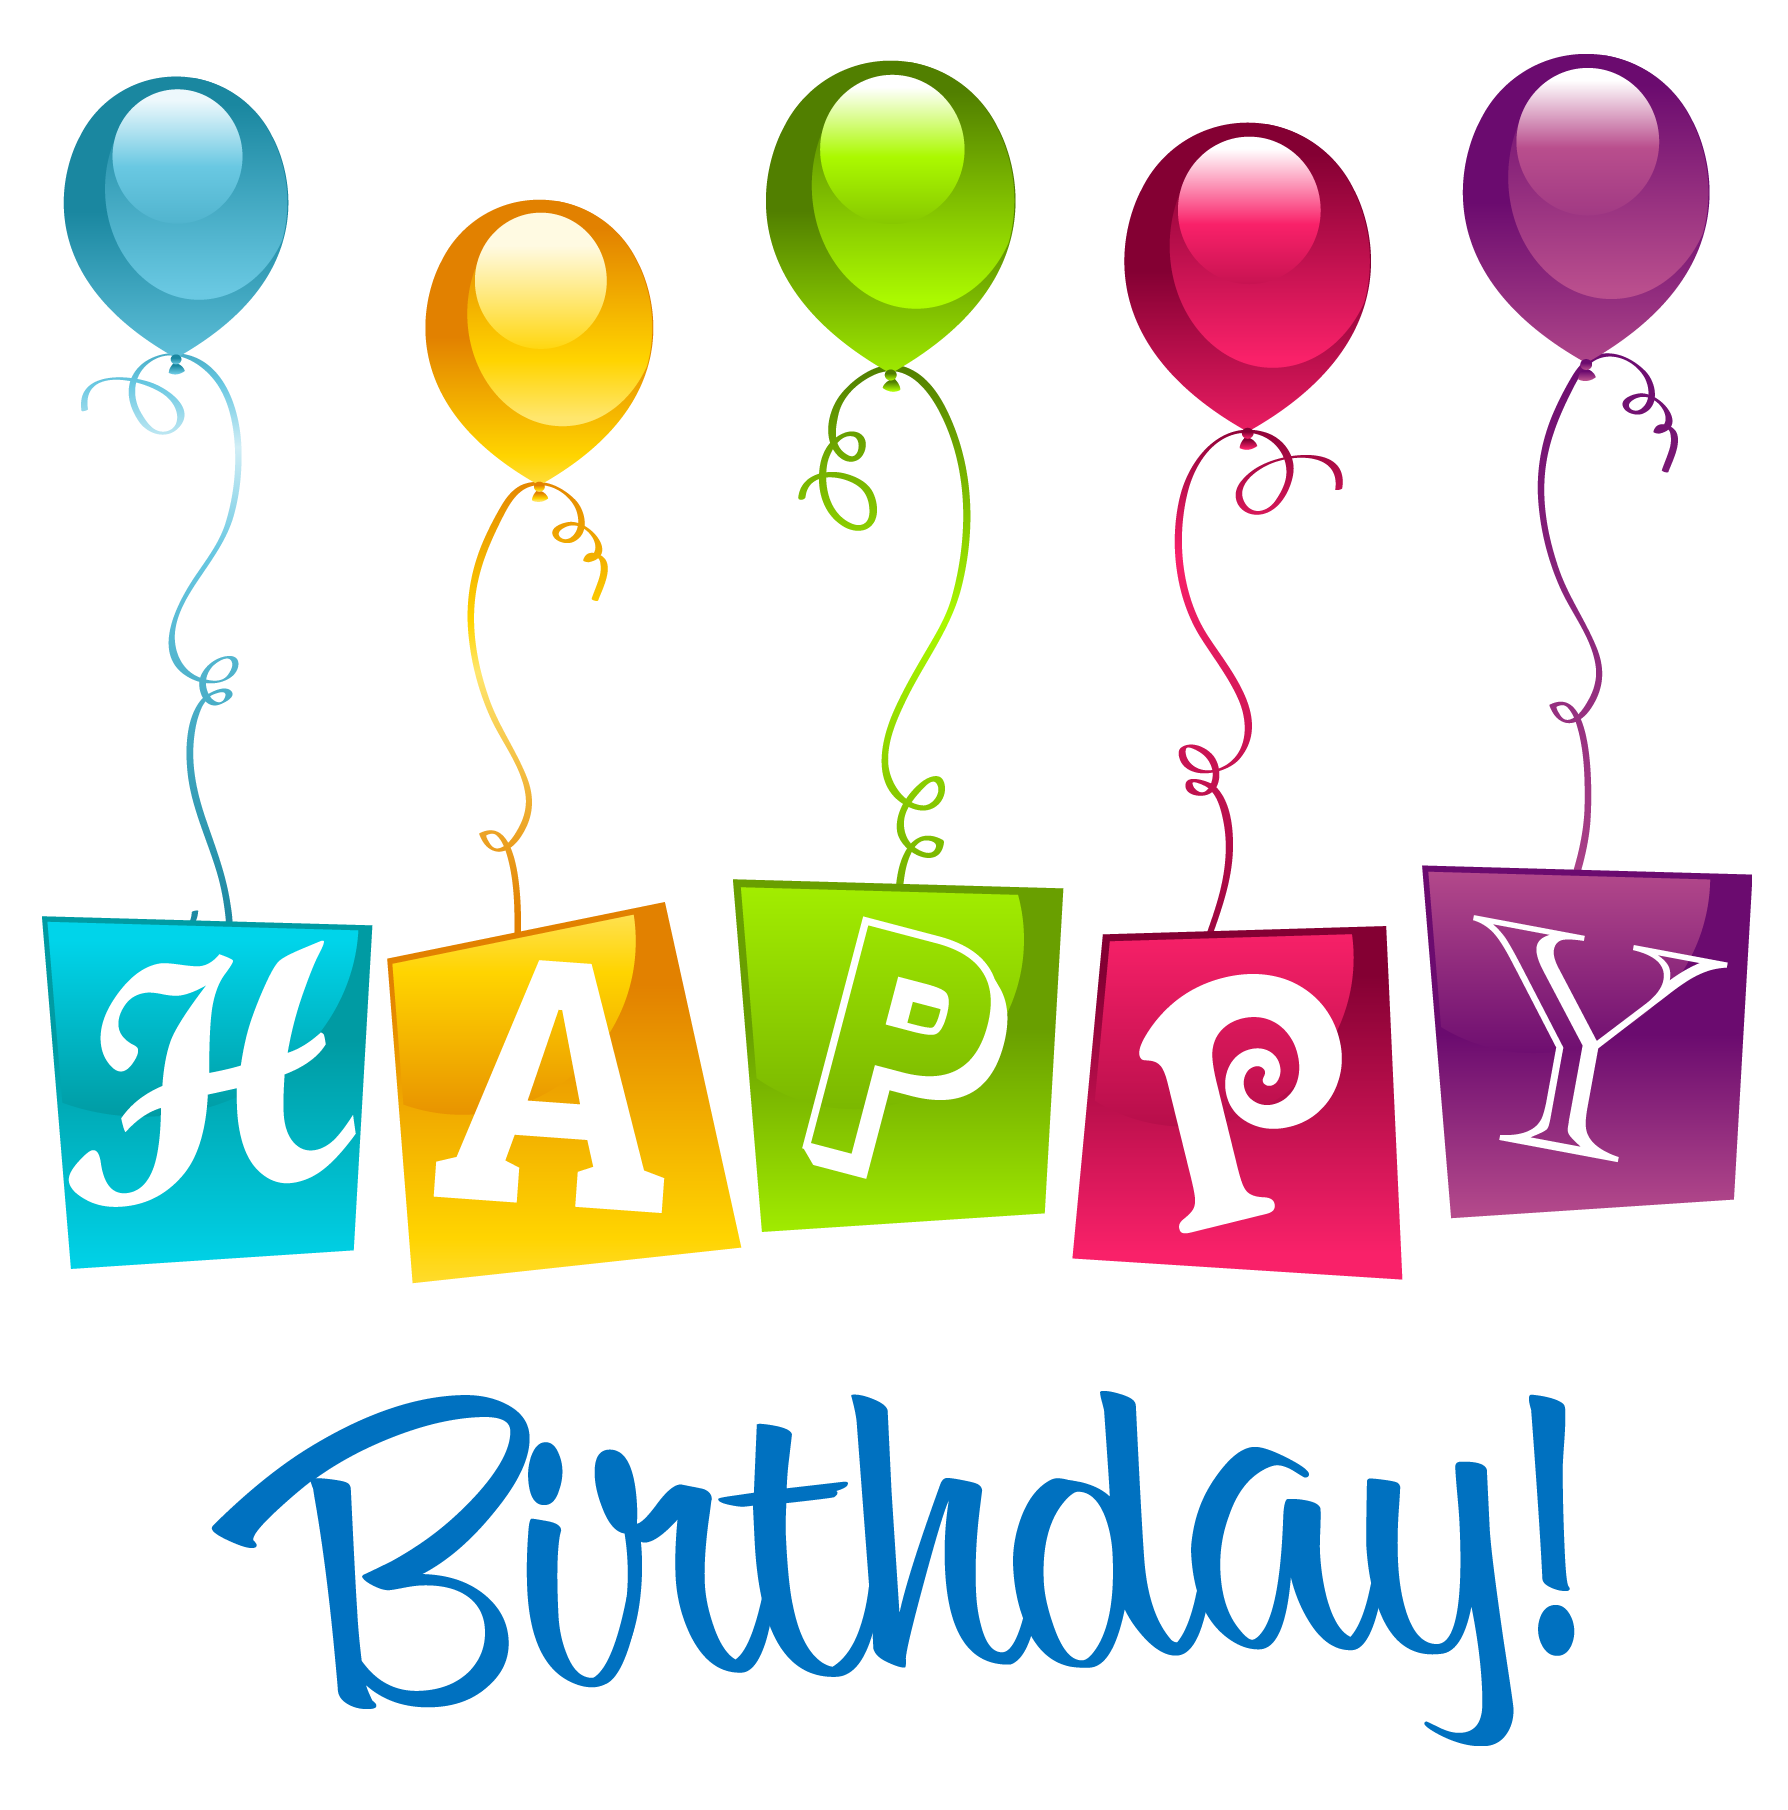 free-birthday-png-to-copy-happy-birthday-cli-206-41-kb-free-png-hdpng